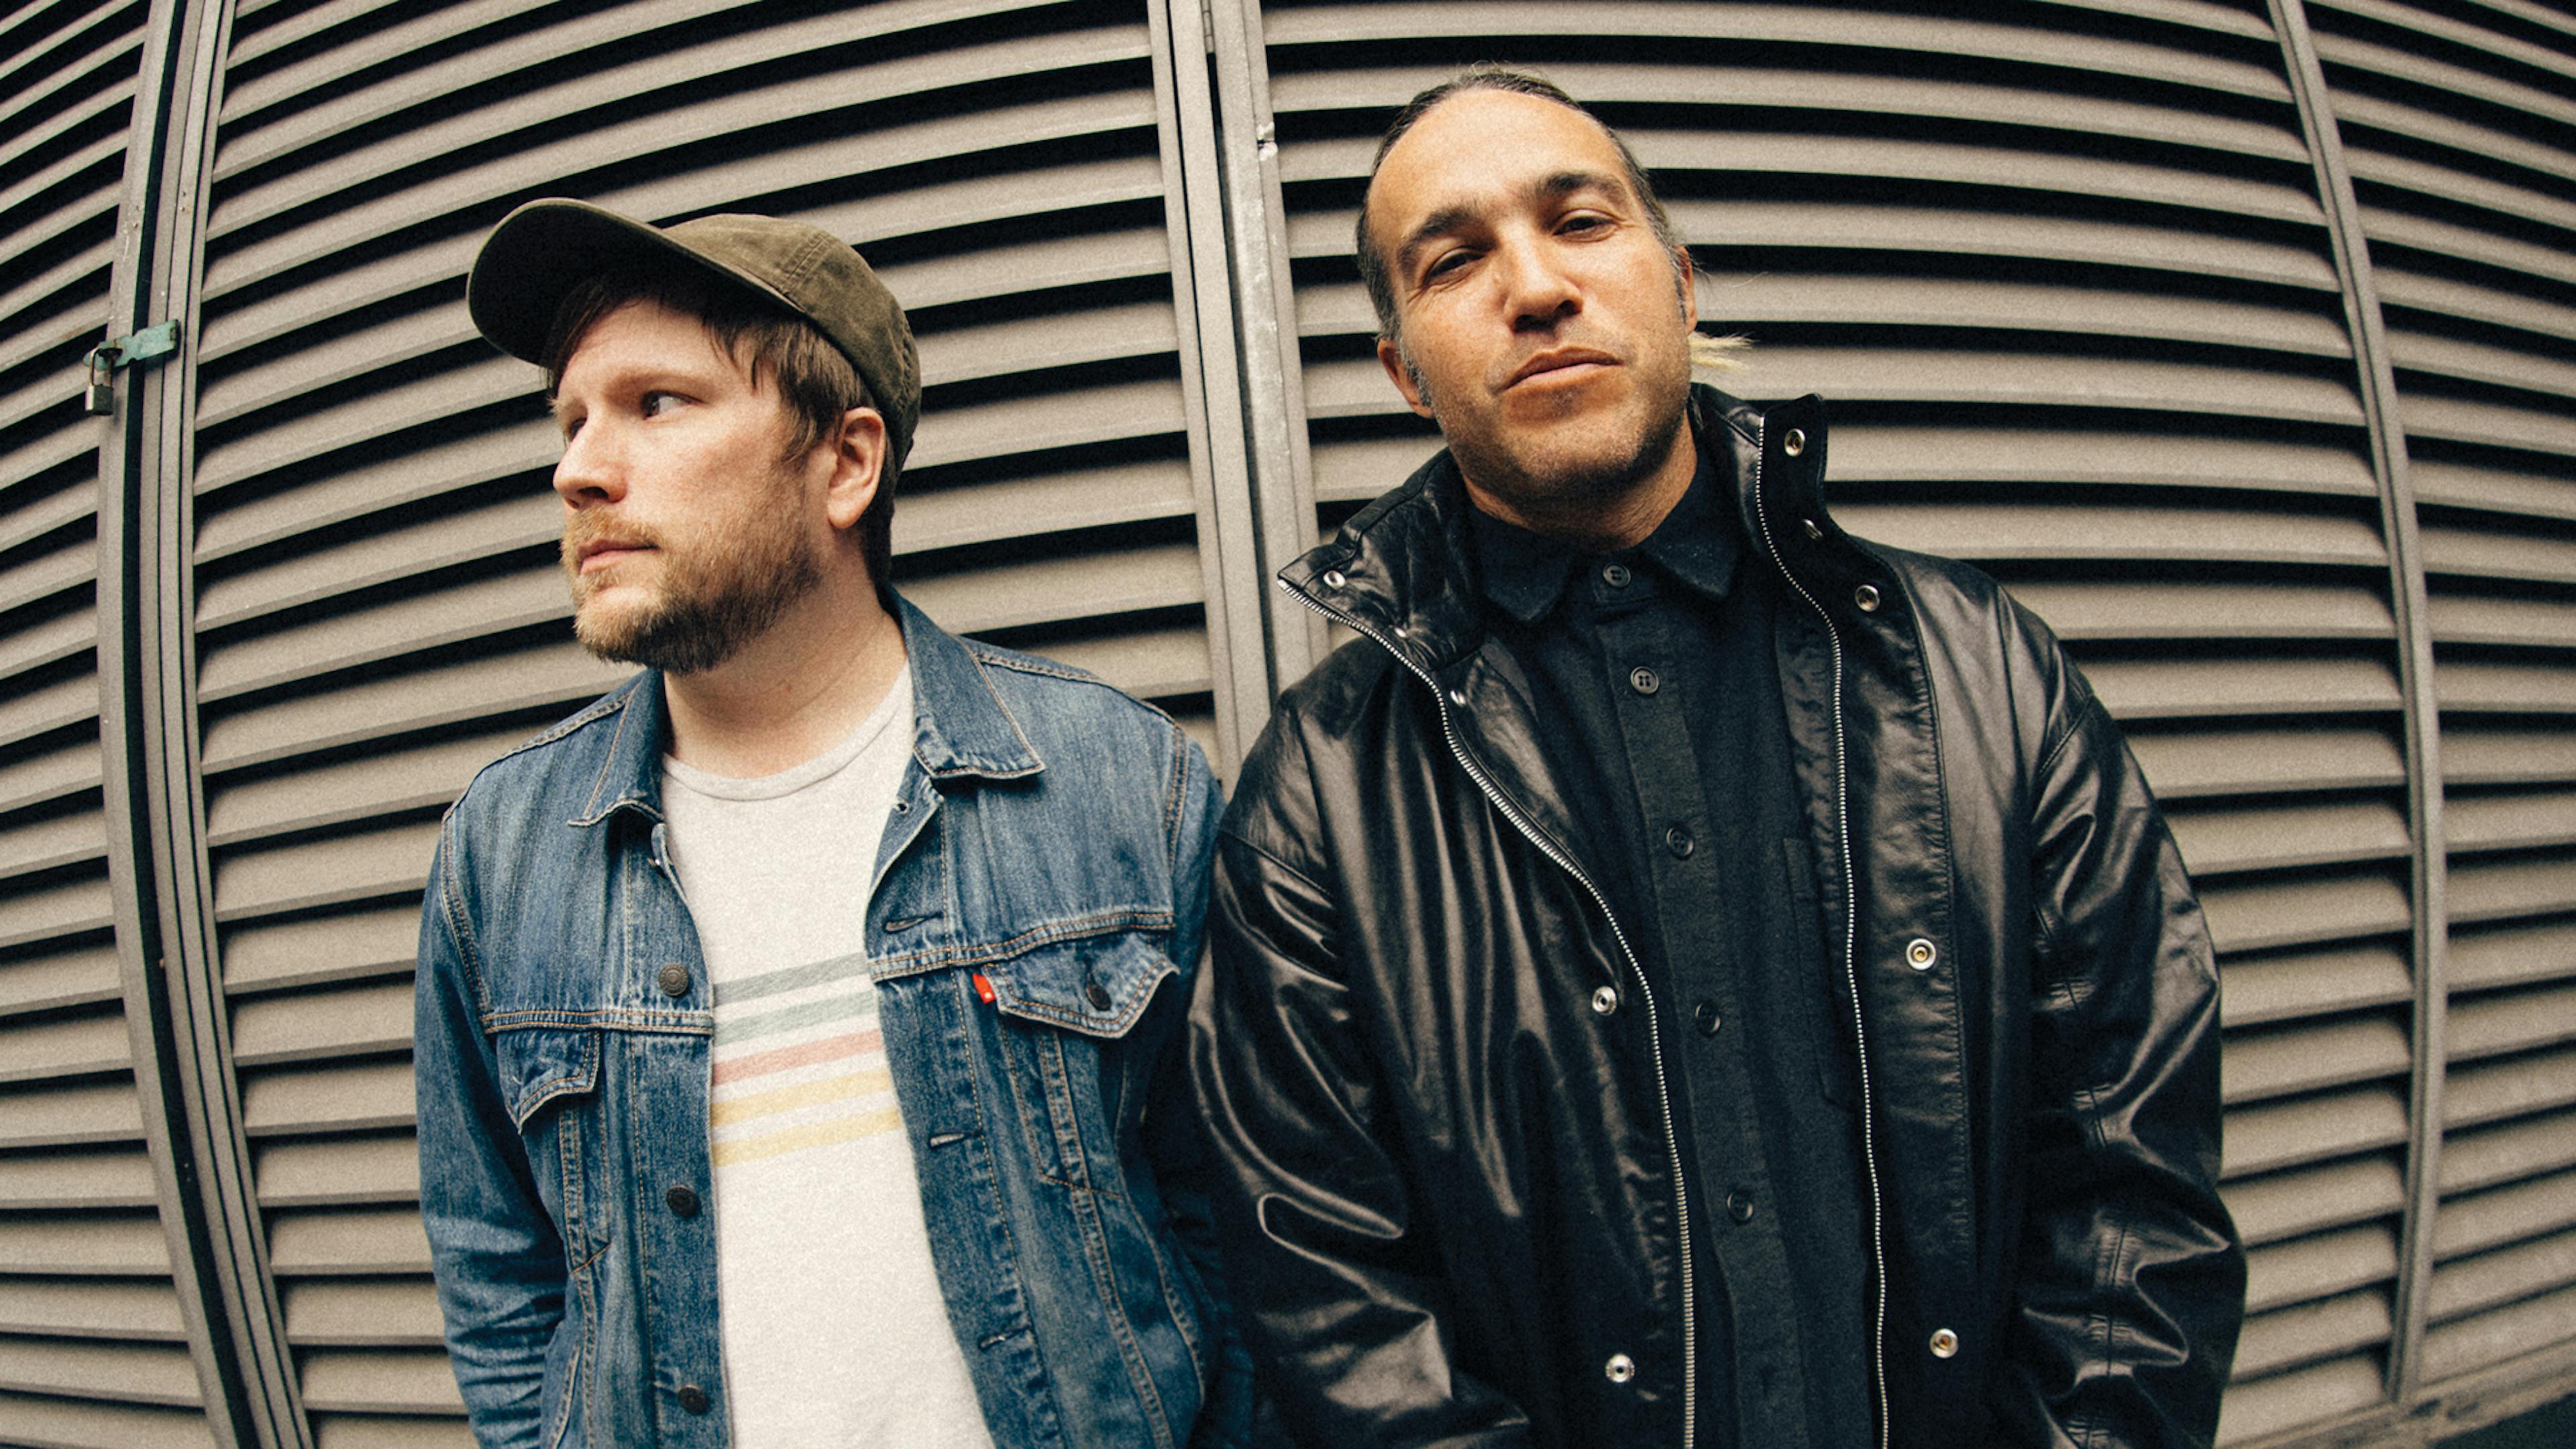 Fall Out Boy: “When we get onstage, we as a band are still earning it. That’s exciting!”